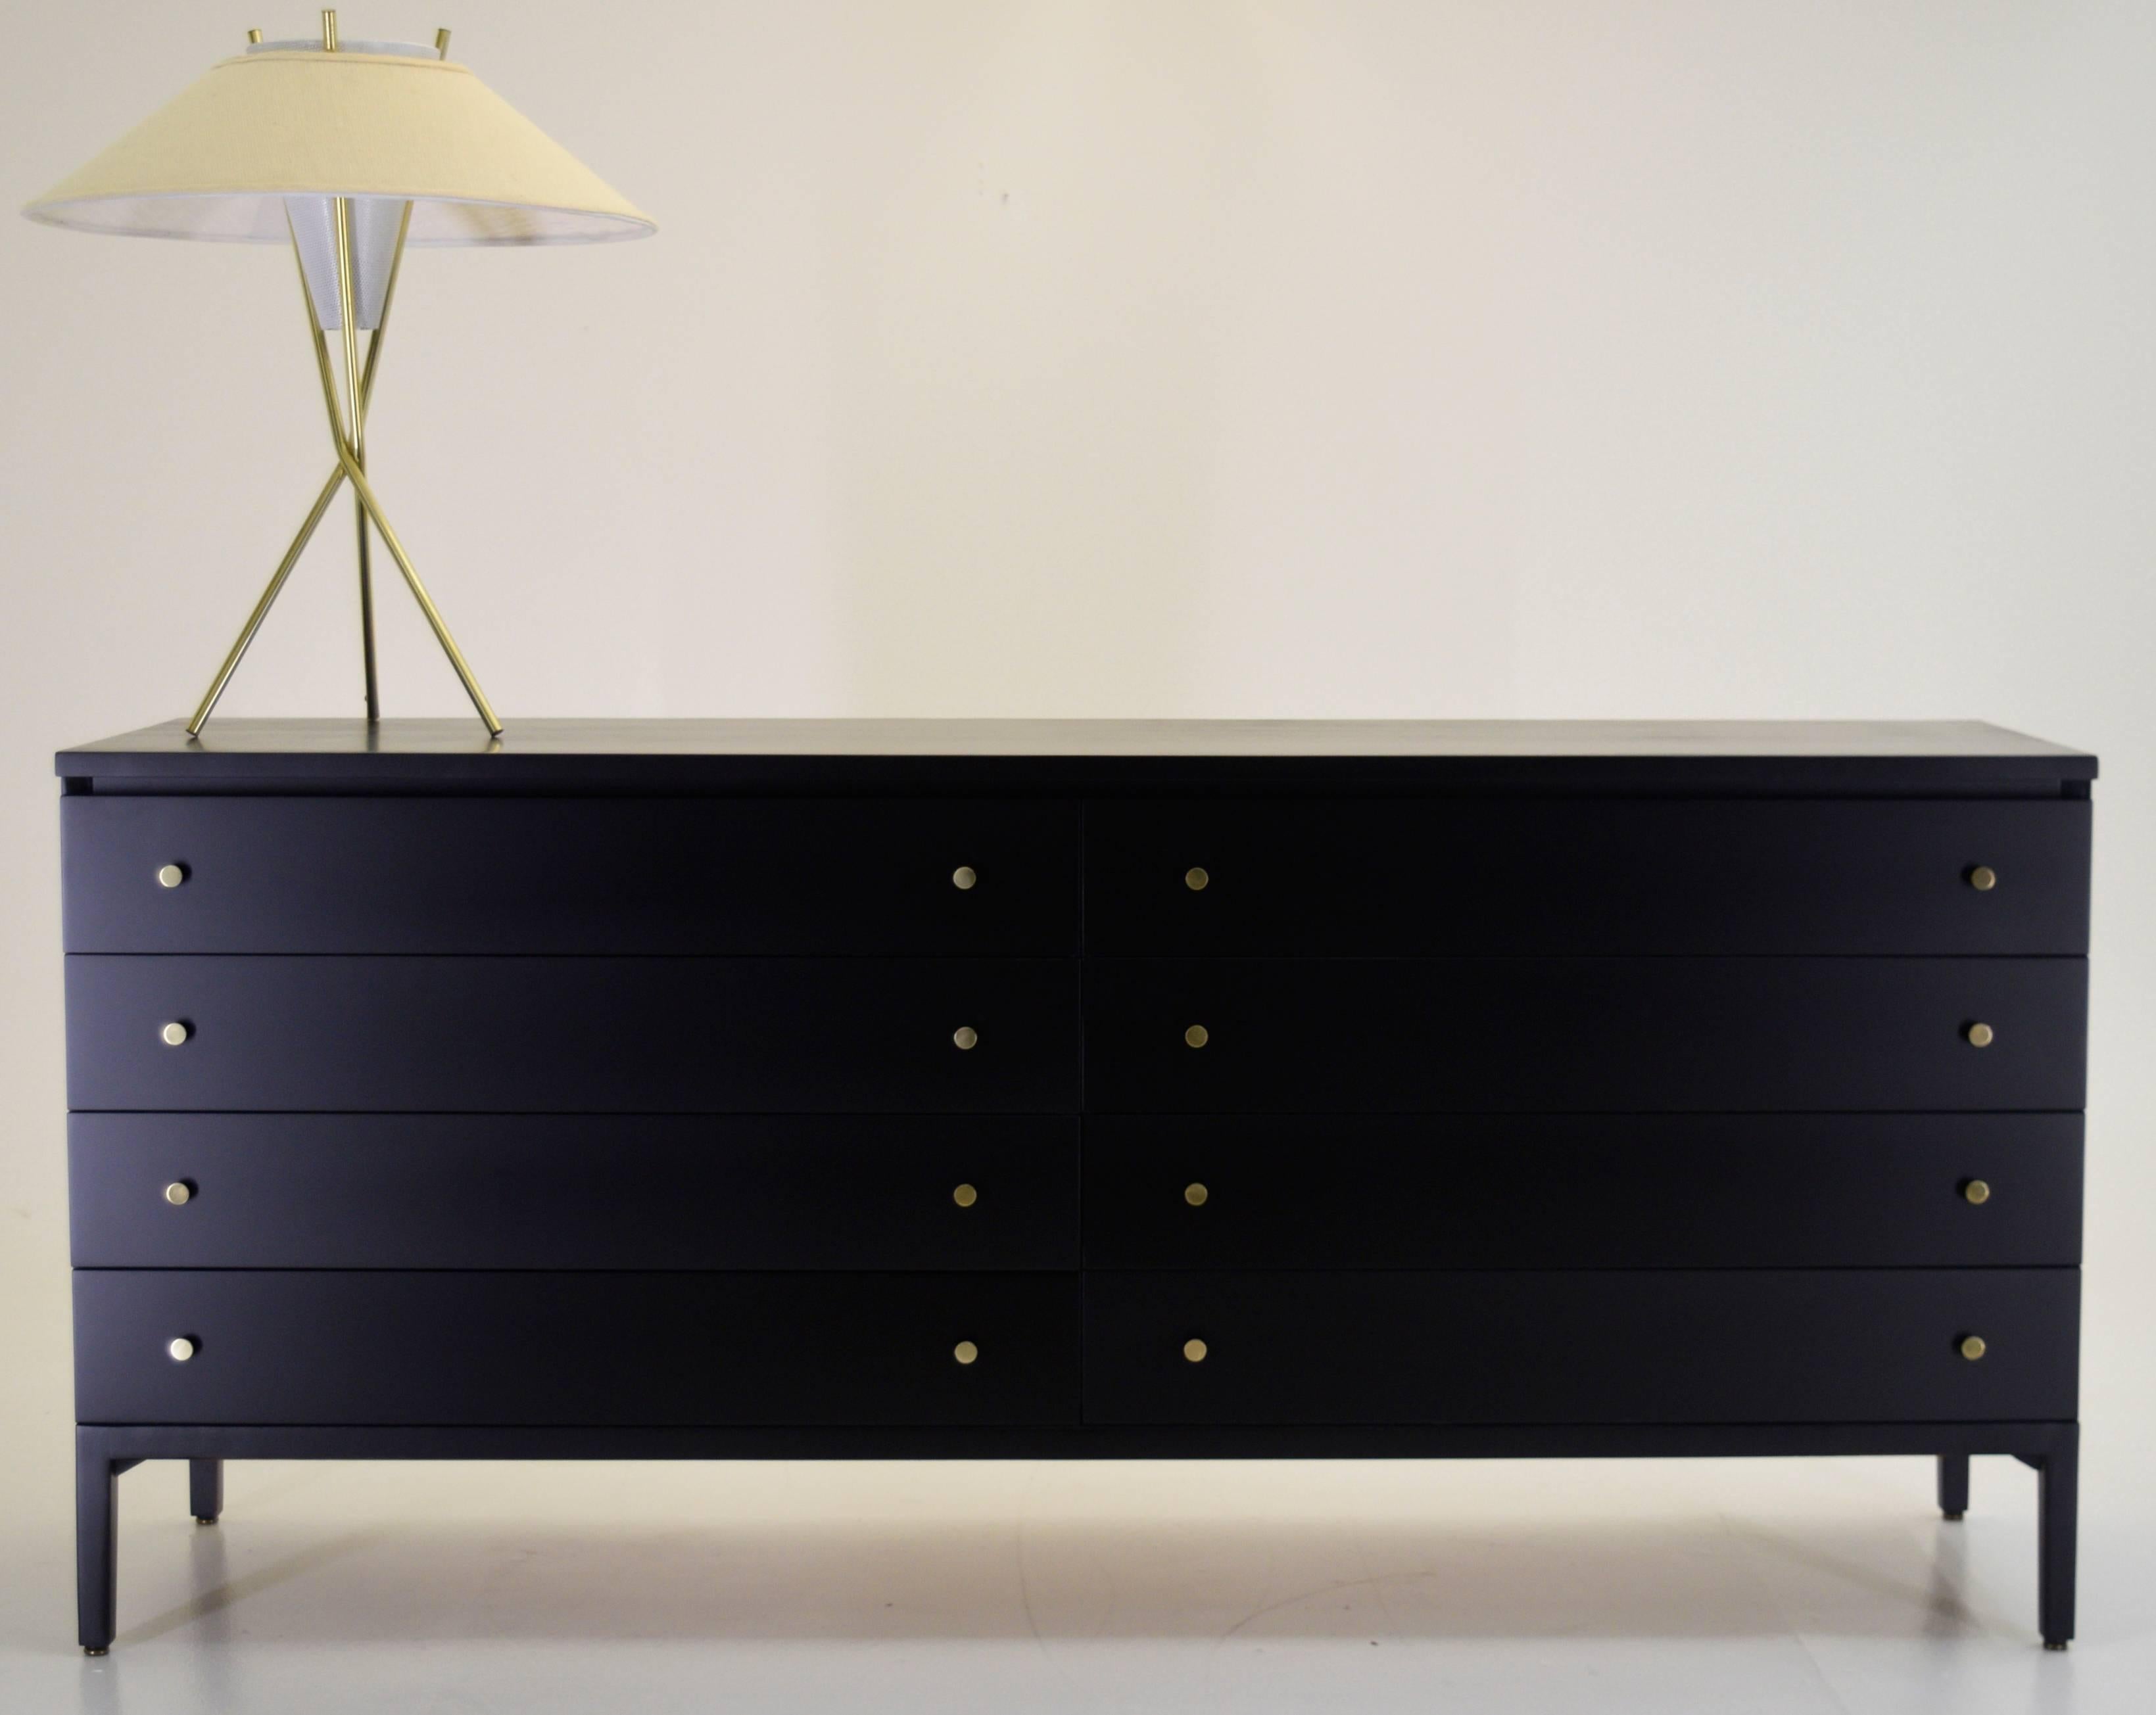 Pristine Black Lacquer Double Dresser by Paul McCobb for Calvin Irwin Collection 2